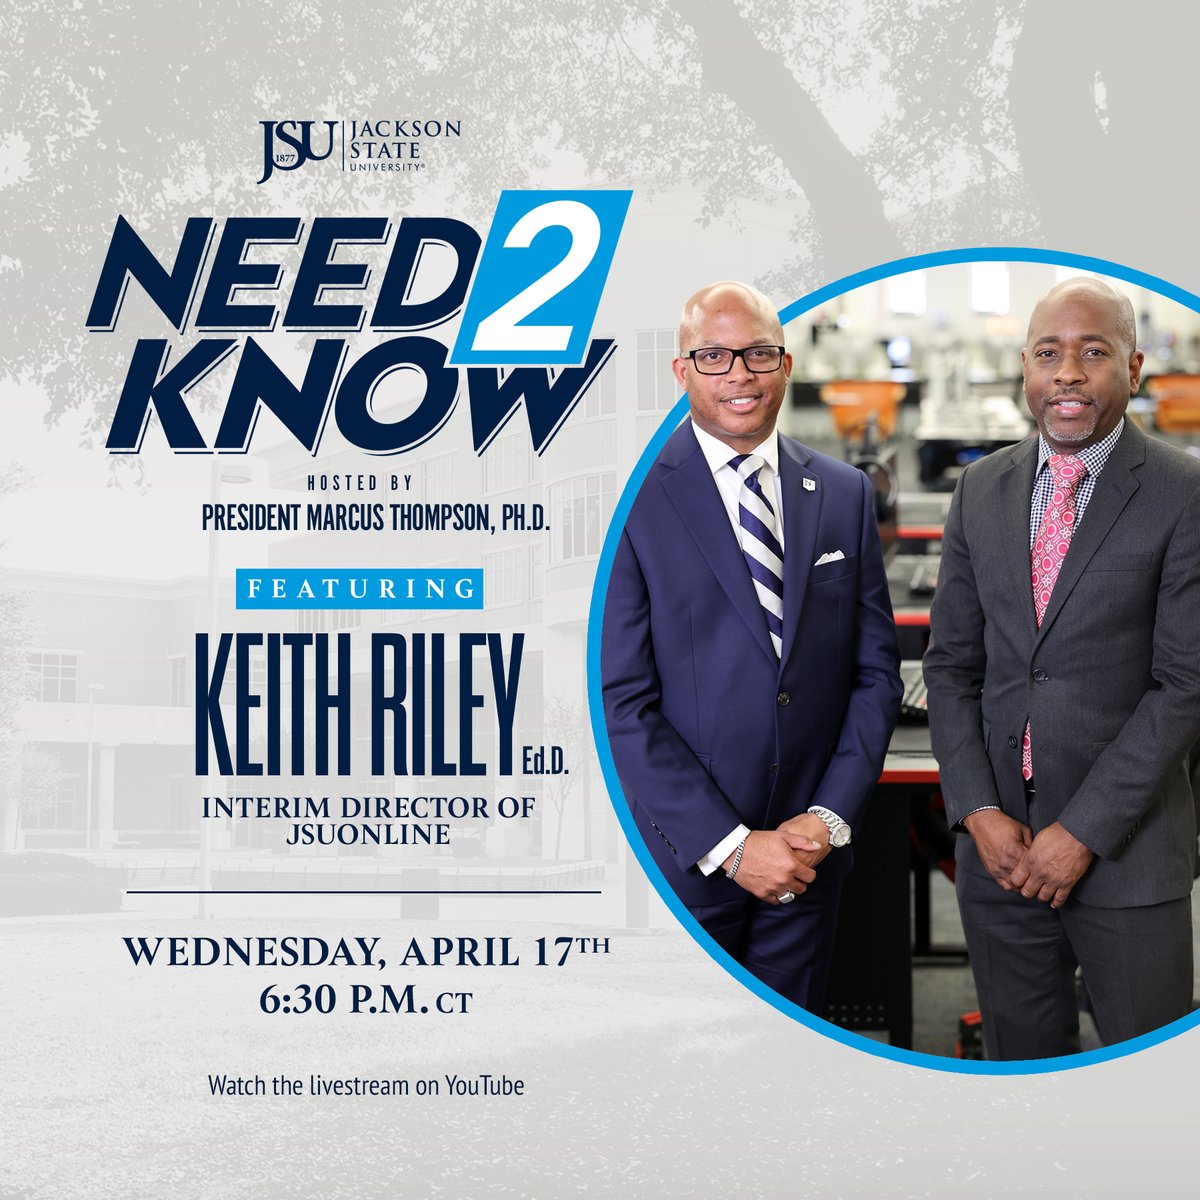 Reminder! Join us today for the next edition of JSU Need 2 Know as @JSUPrez13 speaks with JSUOnline Interim Director Keith Riley, Ed.D., about what makes Jackson State University one of the “Best HBCUs with Online Degrees of 2024.” #JSUNeed2Know #JSUElevate